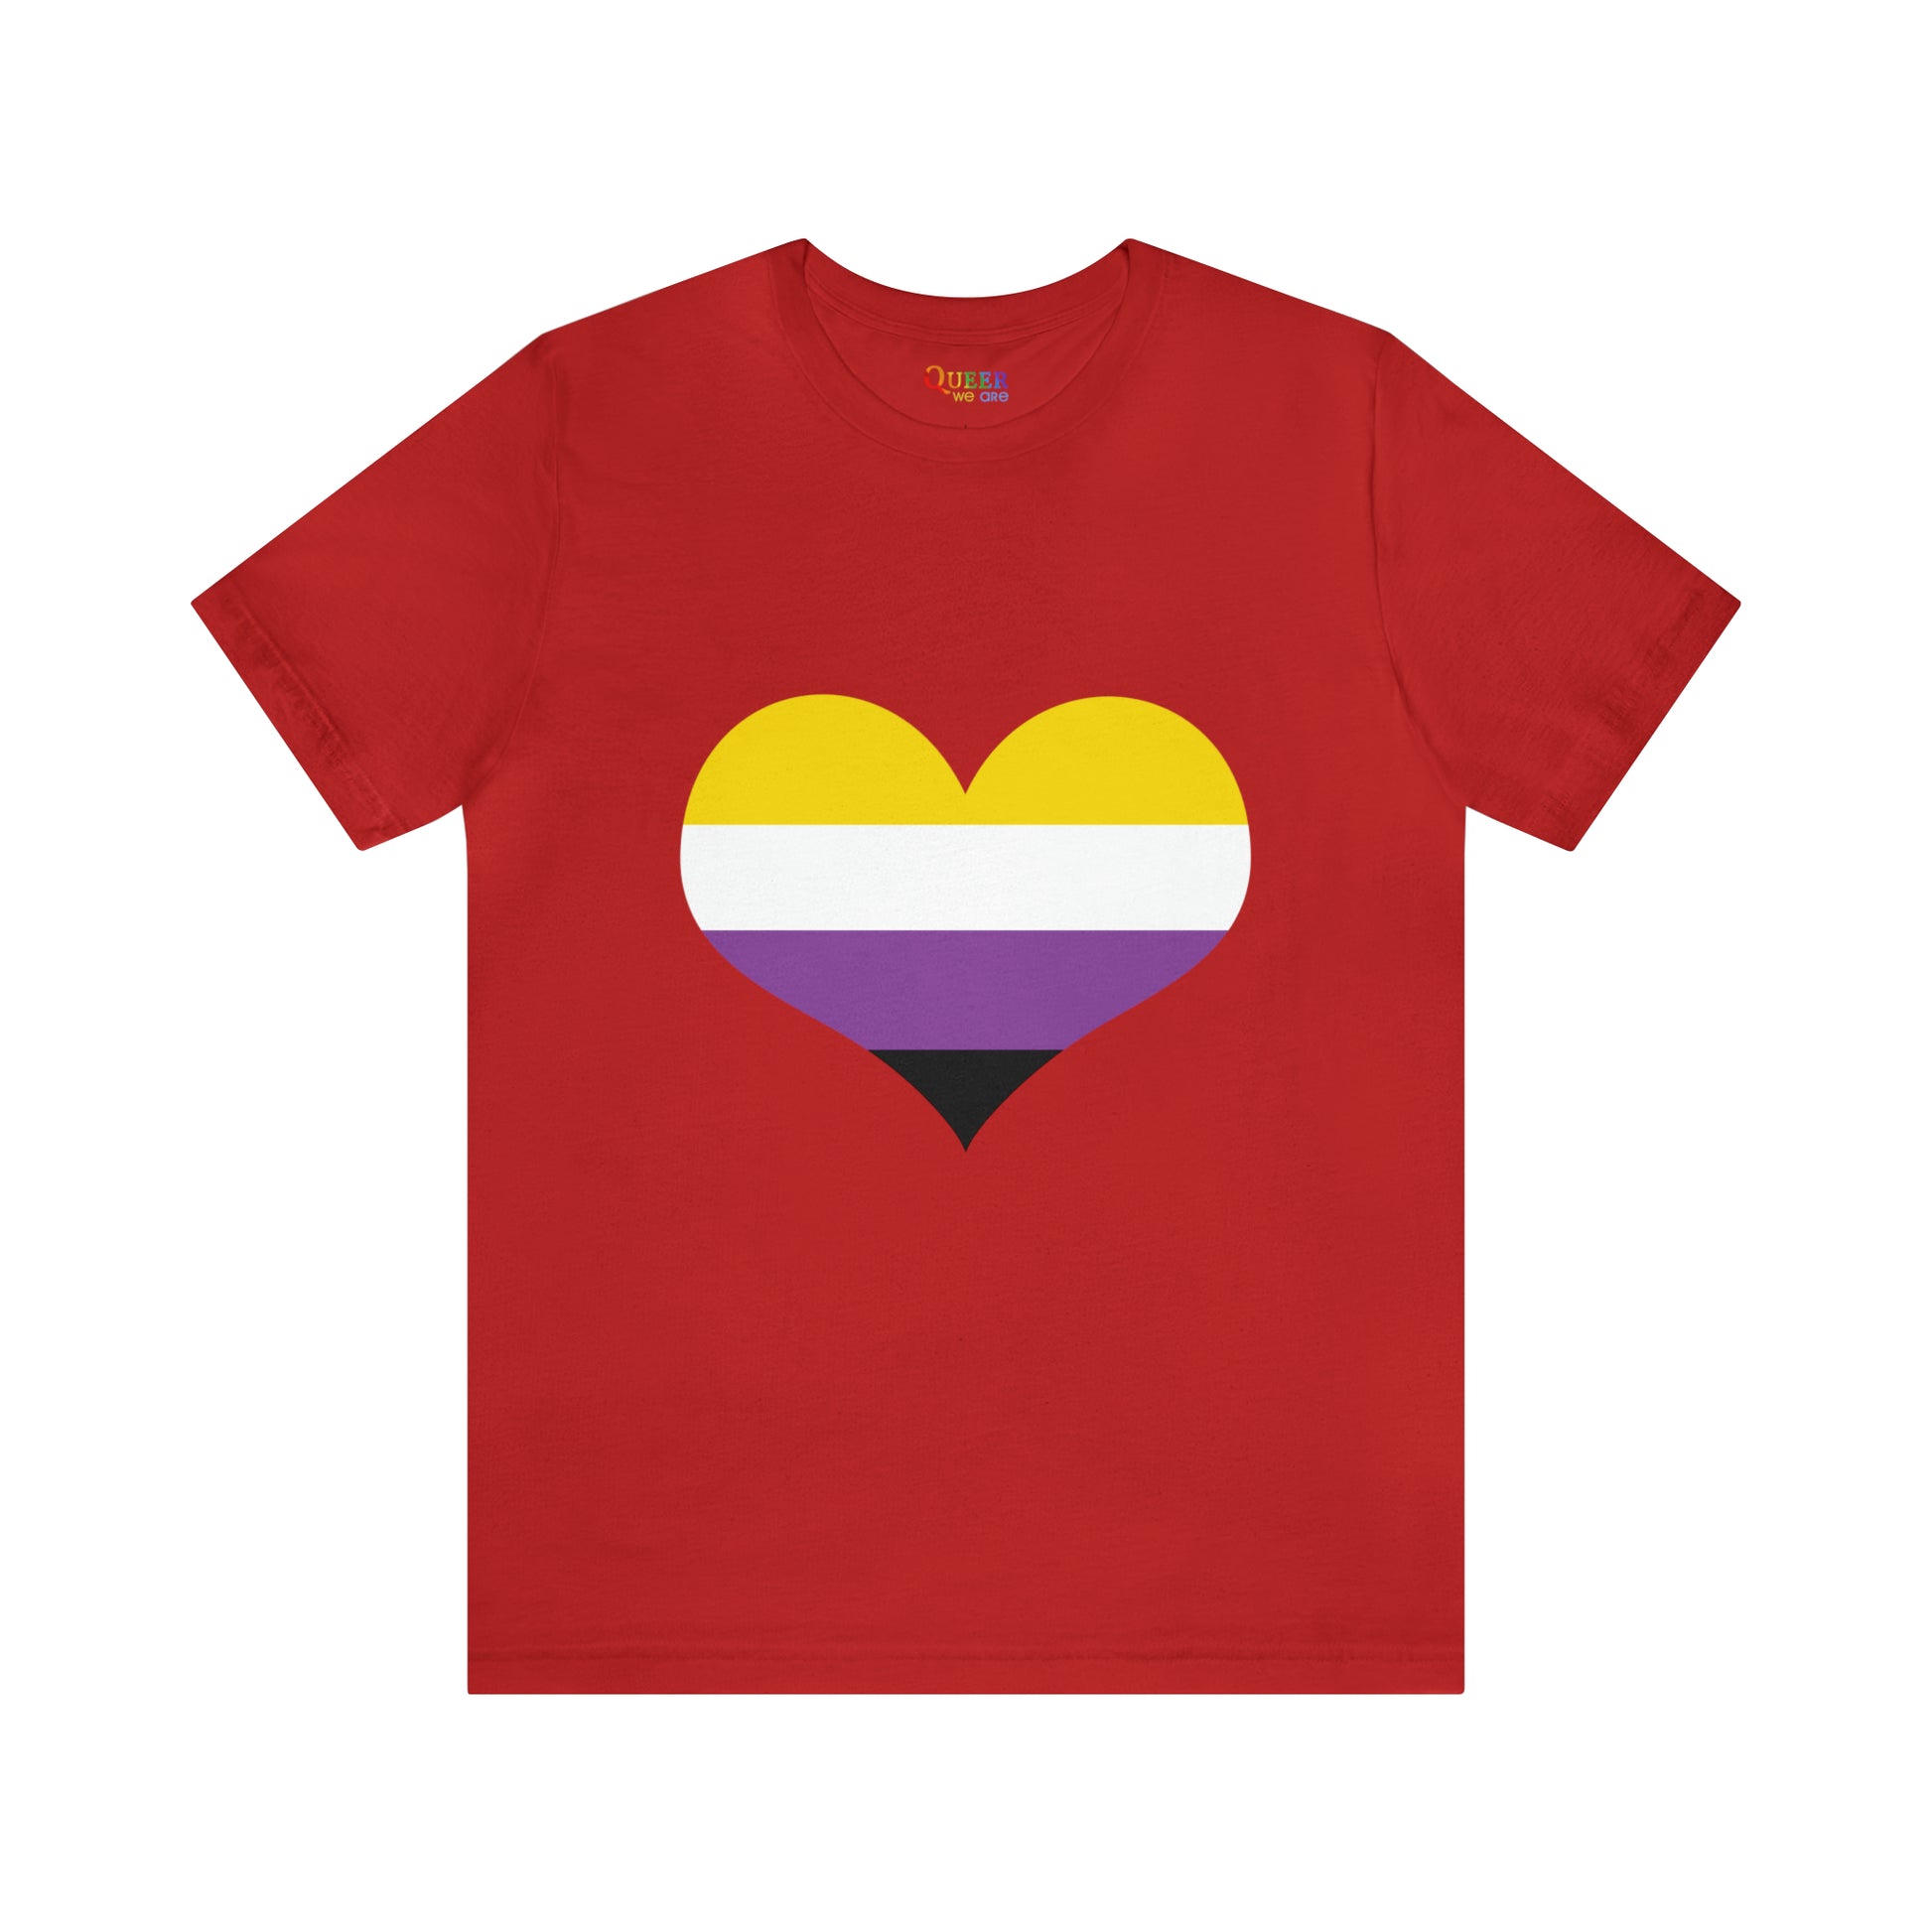 Non-Binary Heart Unisex T-shirt - Queer We Are Shop